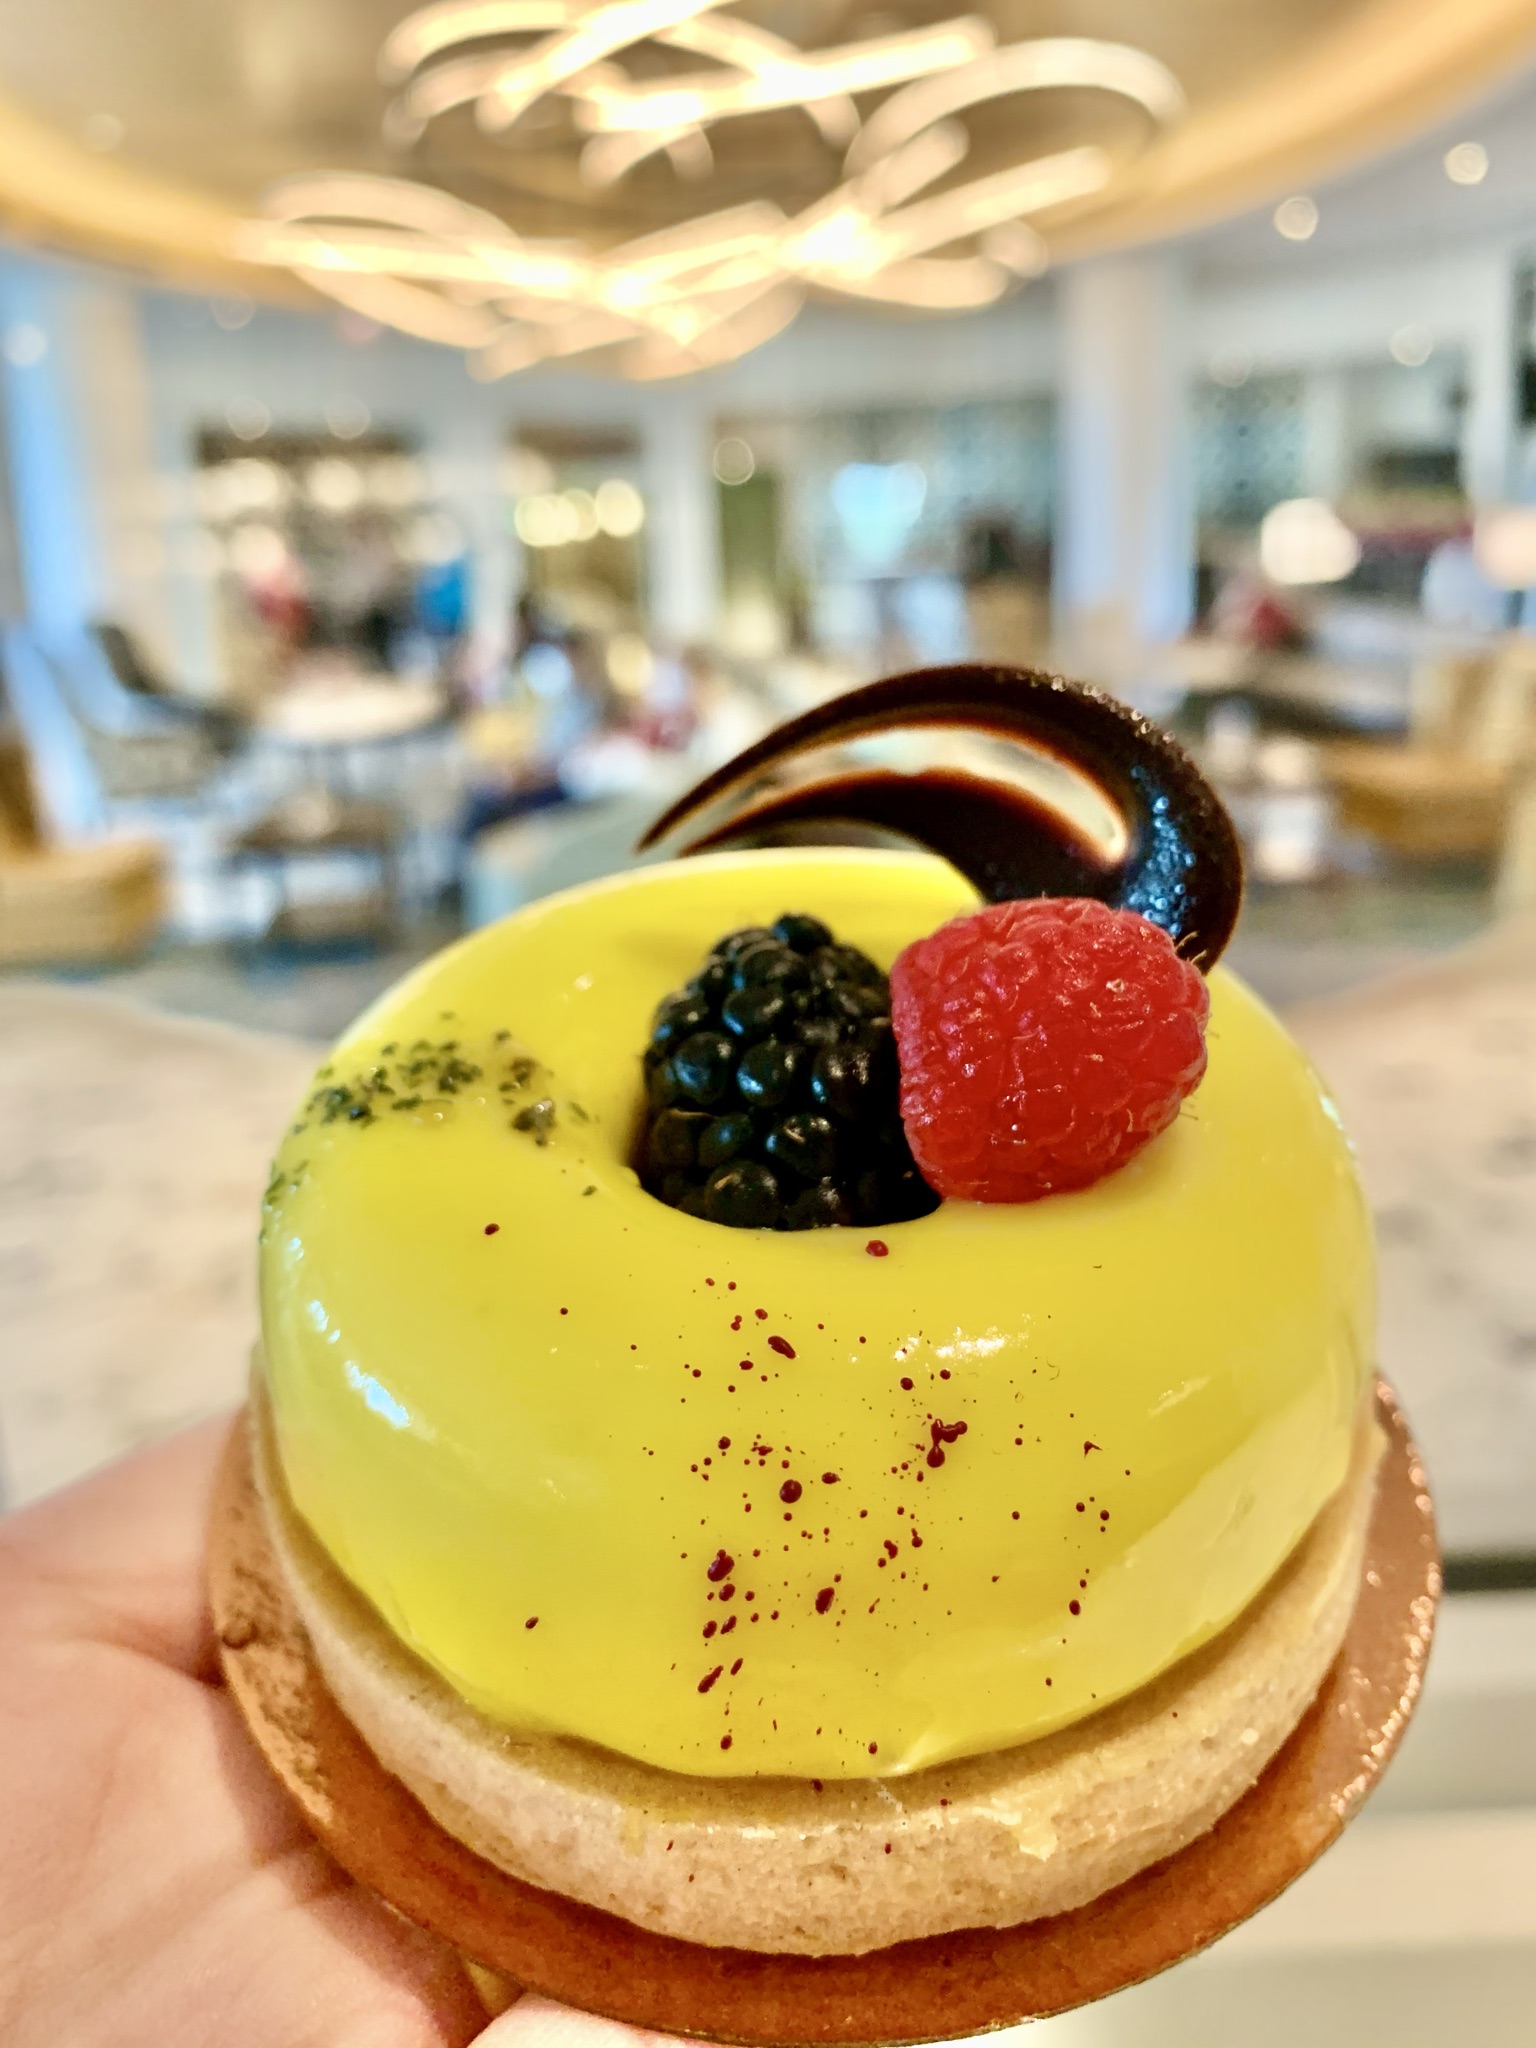 dessert at Disney Riveria resort that is NOT included on the Disney meal plan